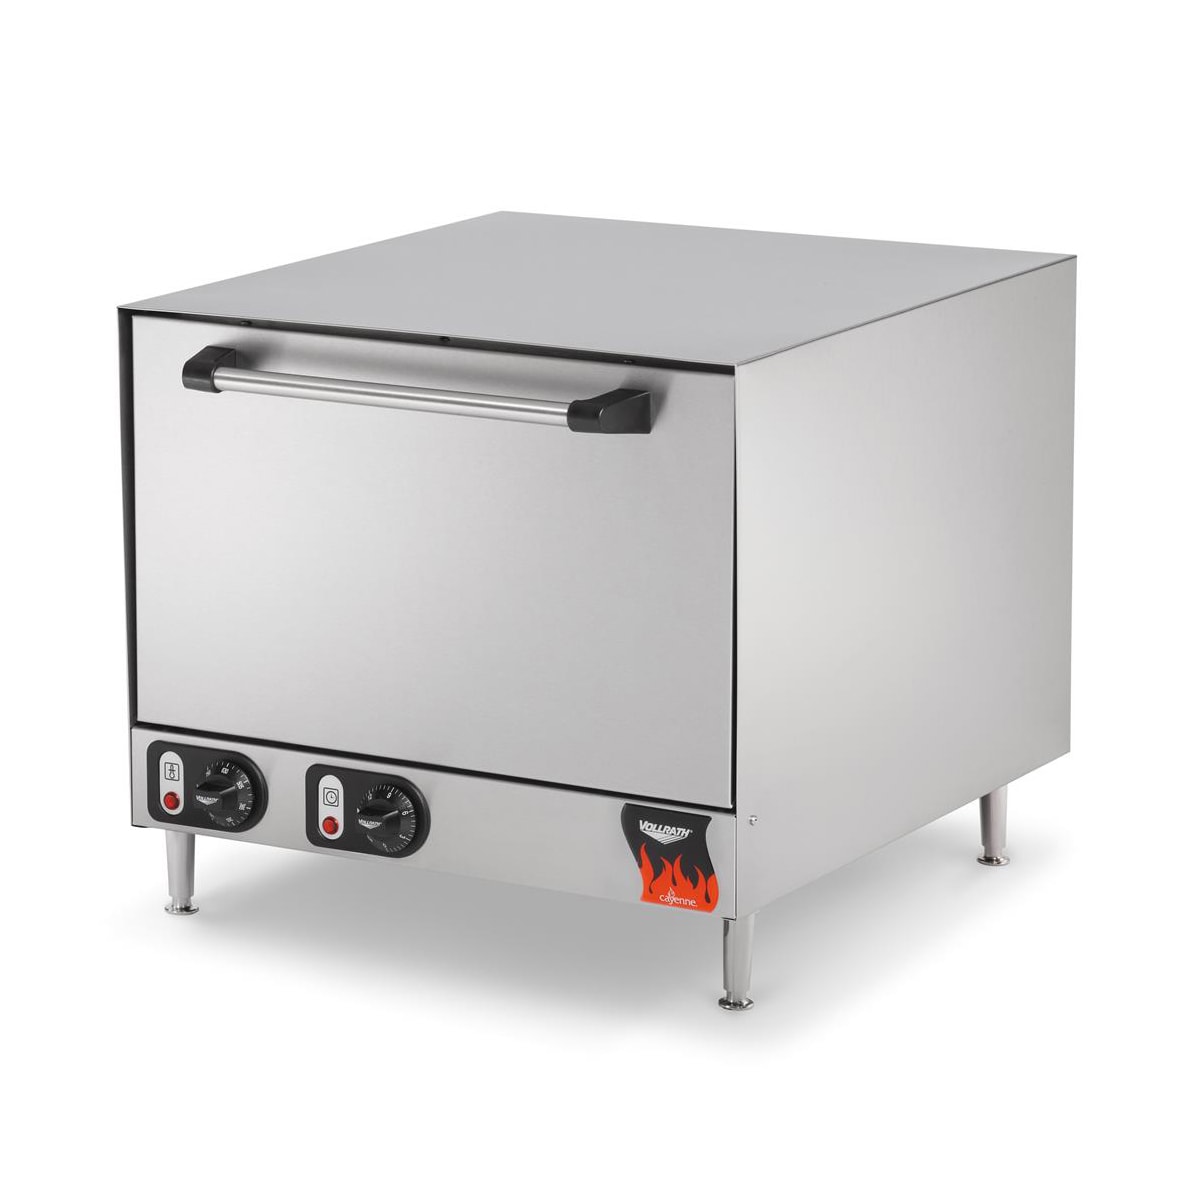 Vollrath 40701 Commercial Countertop Convection Oven 1/2 Pan